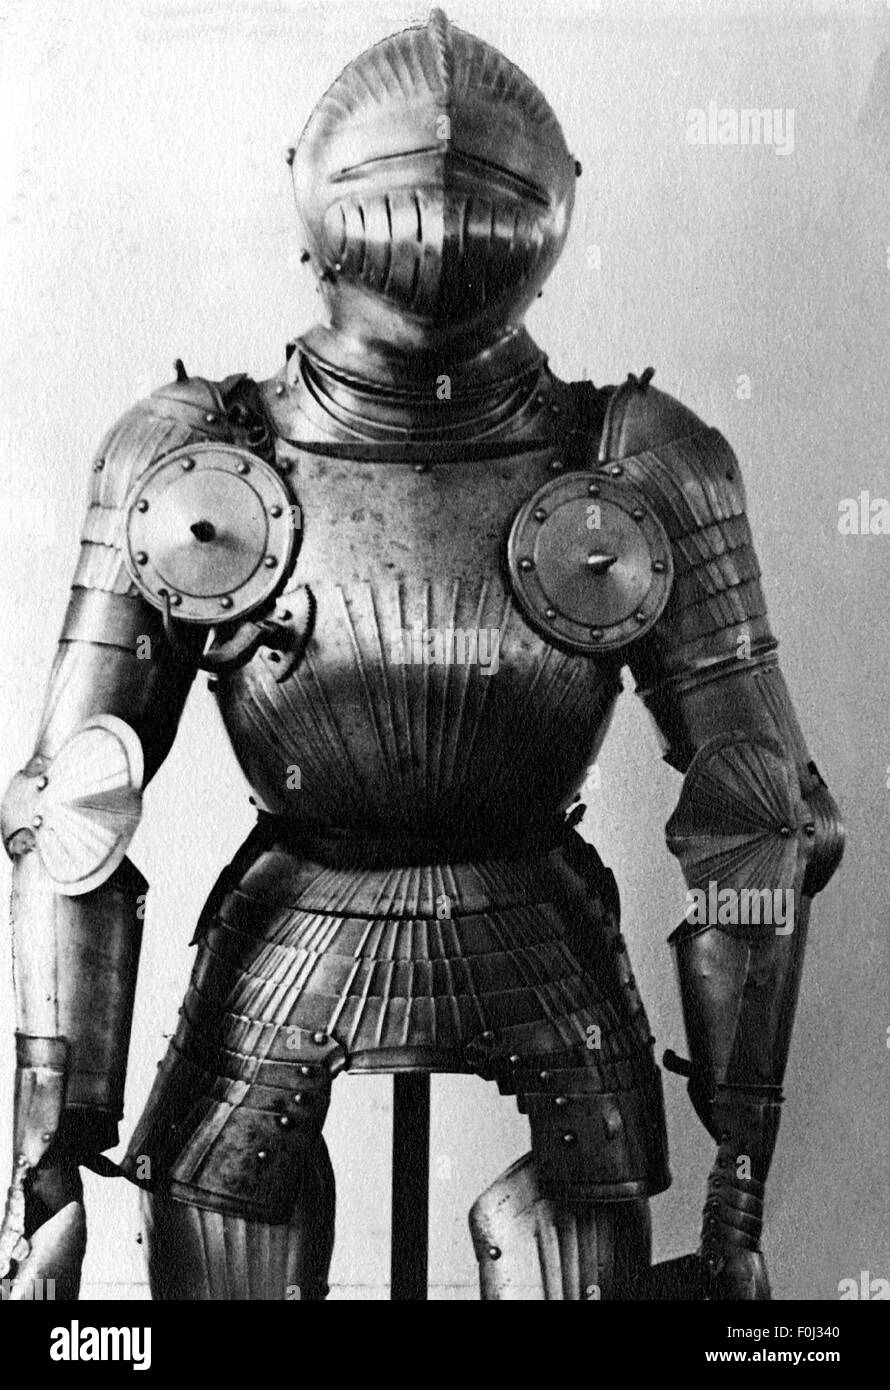 military, Middle Ages, knight's armour, historic, historical, medieval times, harness, defensive arms, helmet, metal, plating, armour-plating, armour, armor, reactive armour, NOT, Additional-Rights-Clearences-Not Available Stock Photo